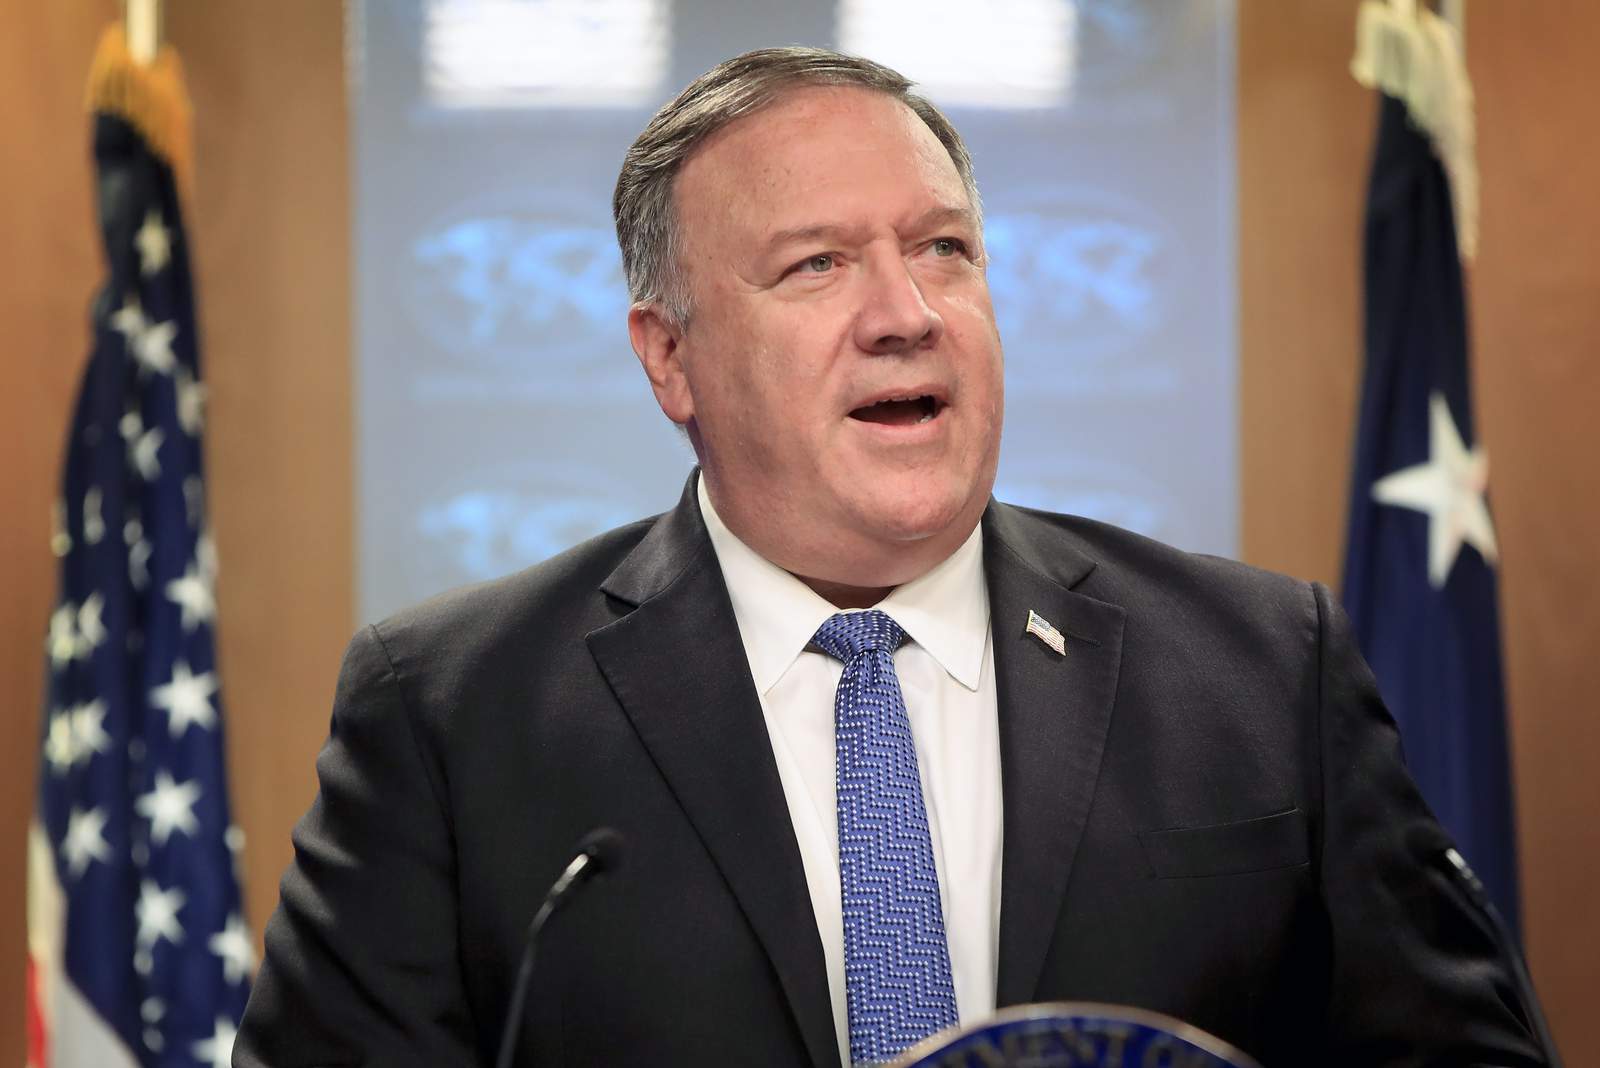 Central, Eastern Europe on Pompeo's itinerary for next trip